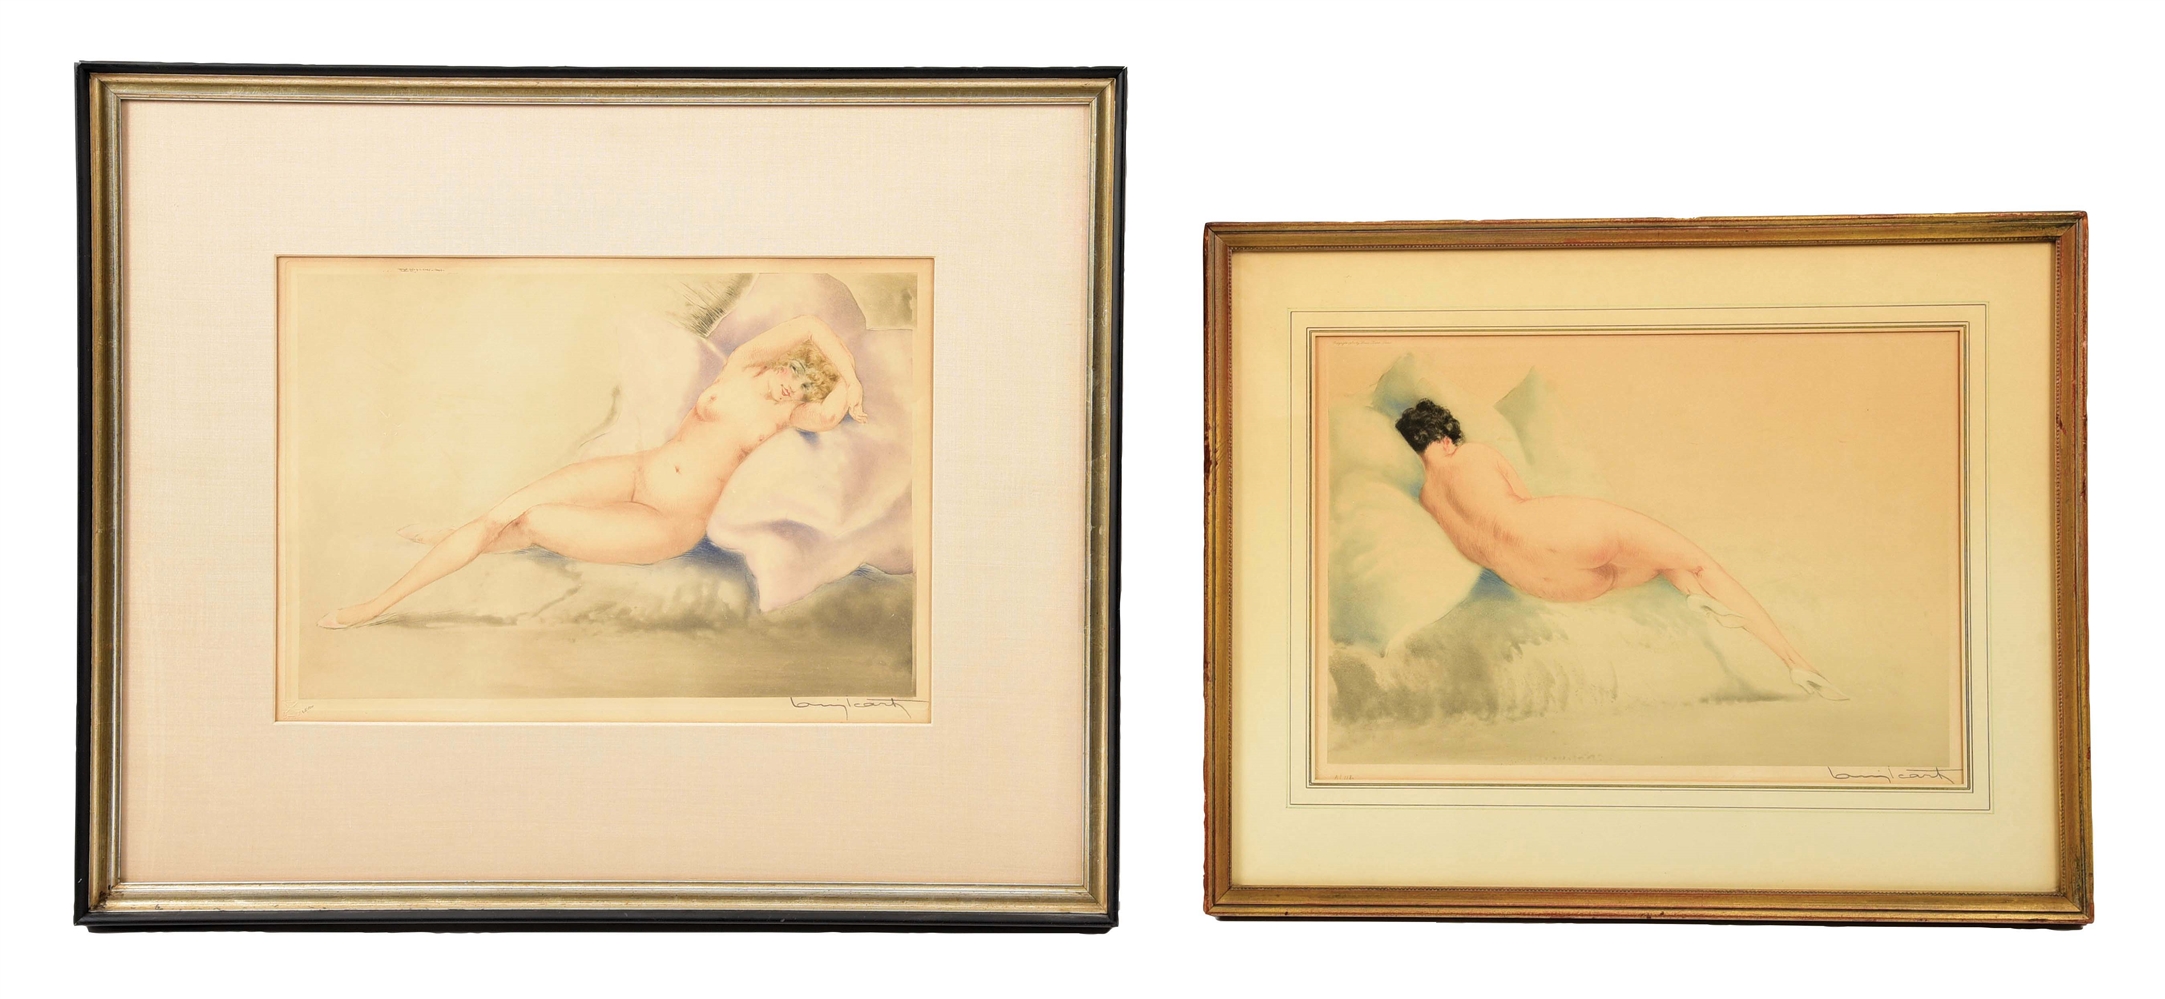 LOT OF 2: LOUIS ICART (FRENCH, 1888 - 1950) "RIEUSE" & "BOUDEUSE".